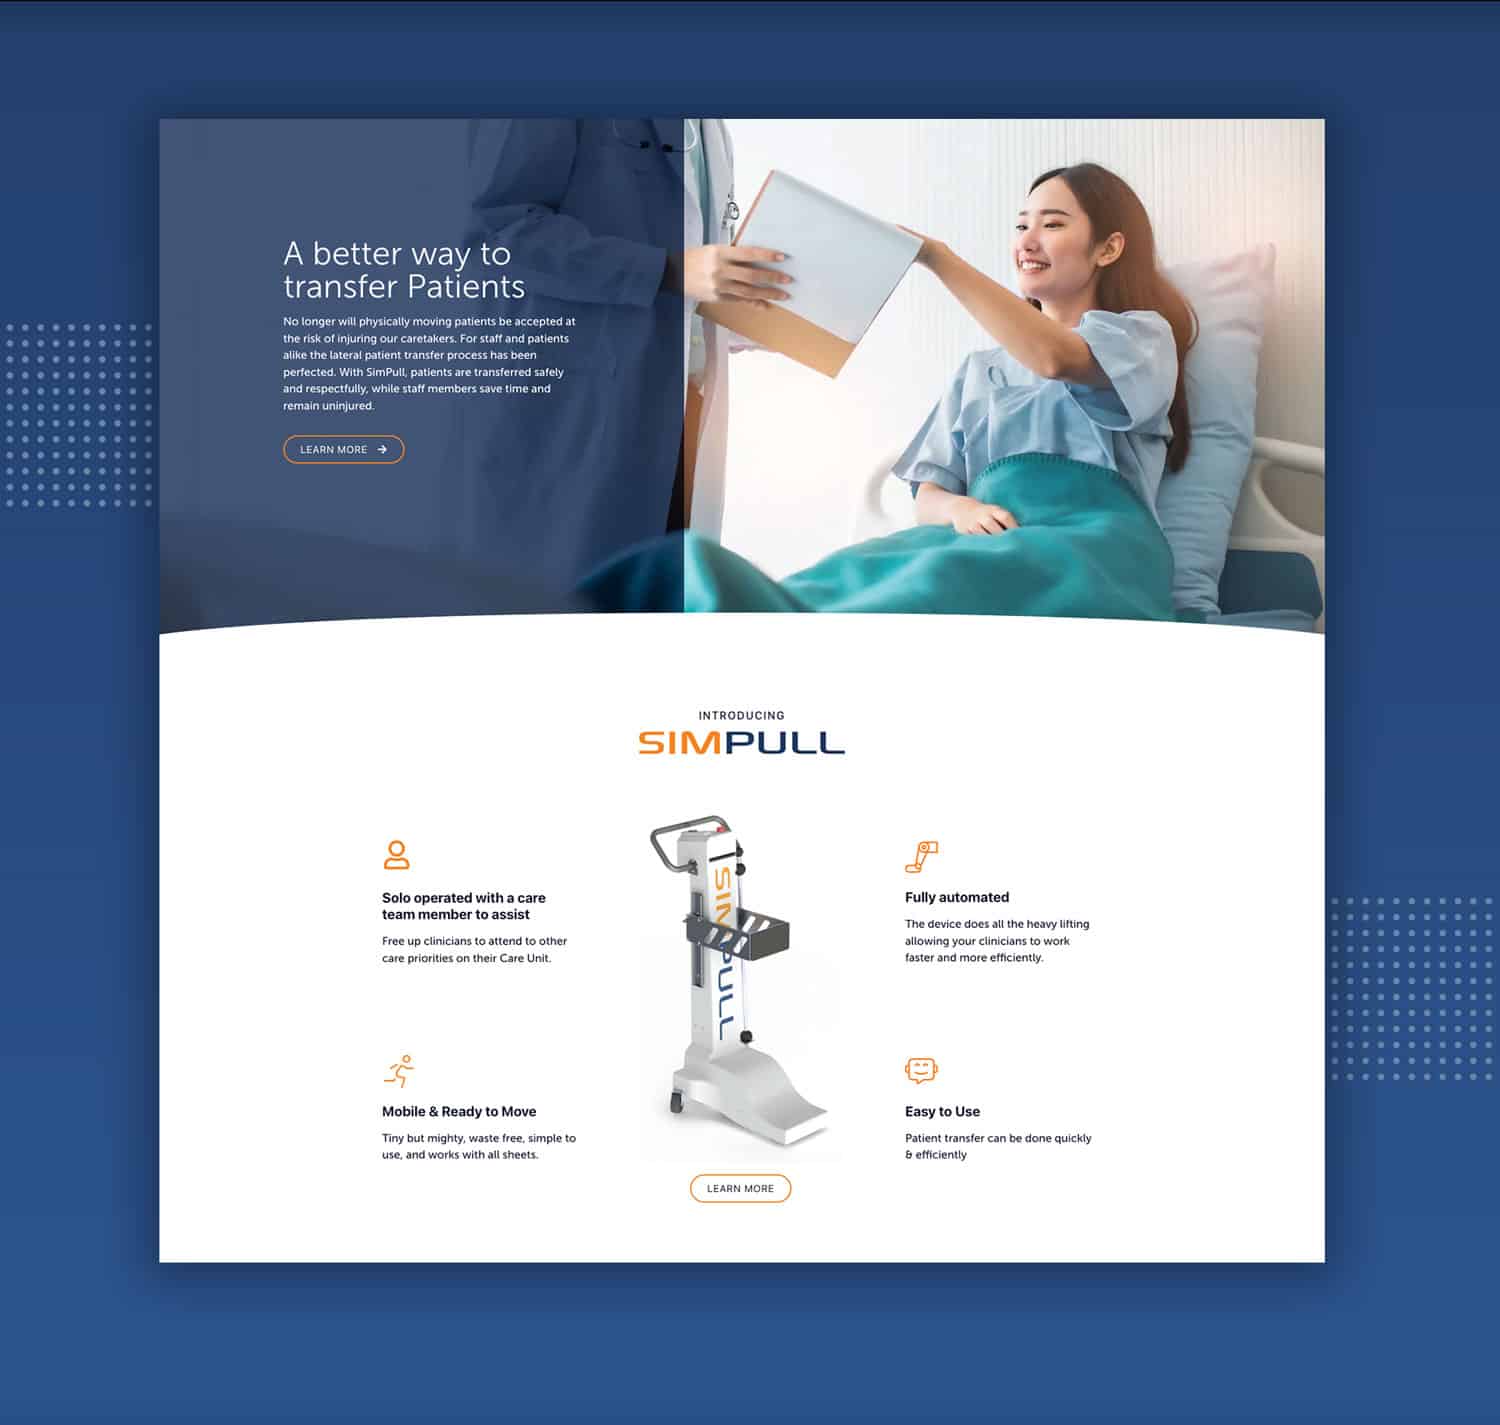 The Patient Company website image